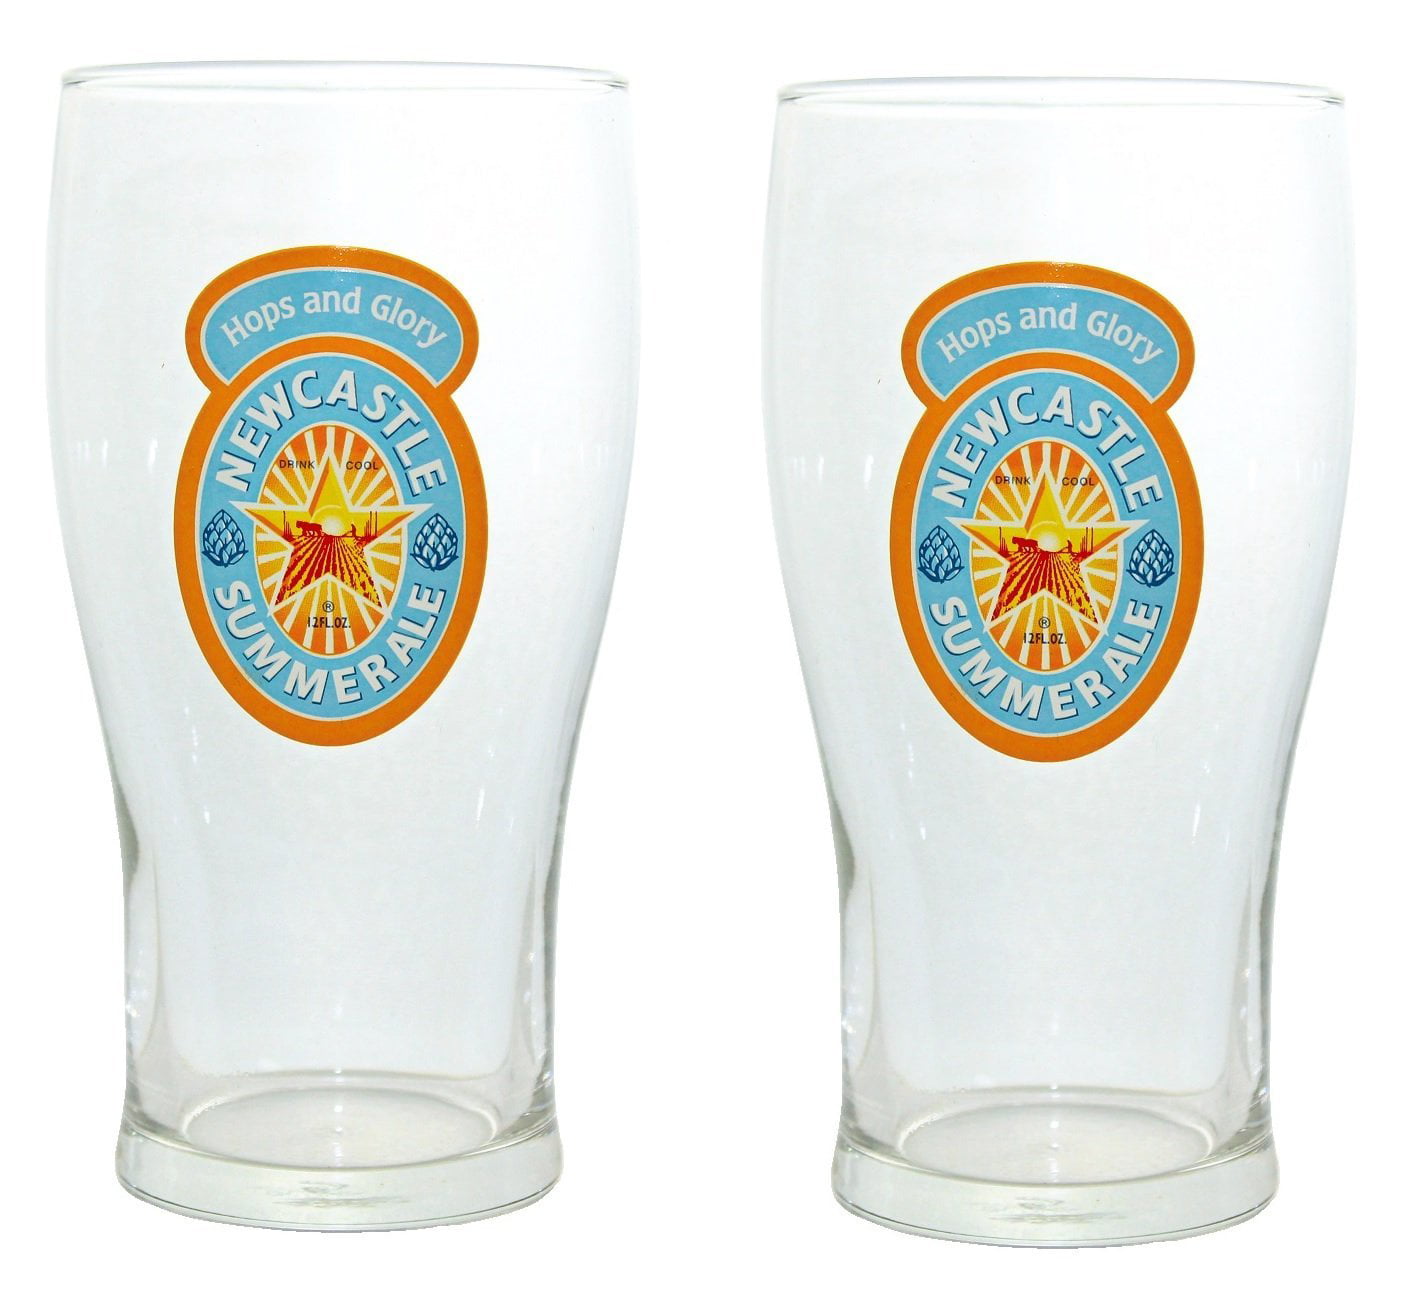 NEW NEWCASTLE SUMMER ALE Pint Beer 16 oz Glass Set of 4 